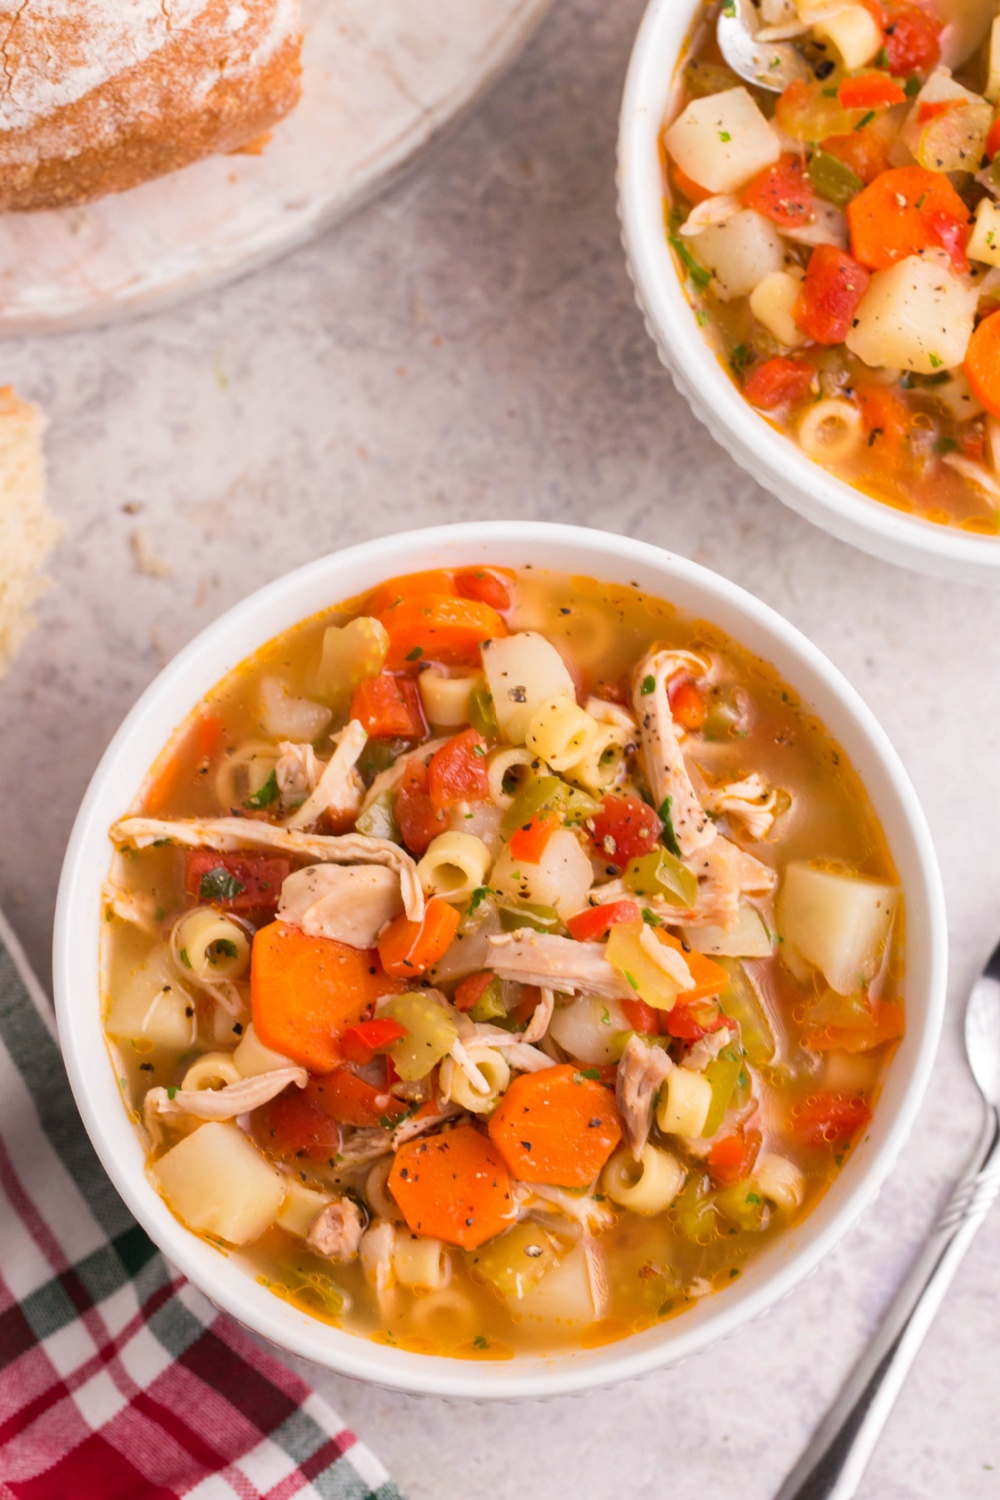 This Sicilian Chicken Noodle Soup combines the convenience of traditional Chicken Noodle Soup with the zest and fun of Italian cooking. via @familyfresh